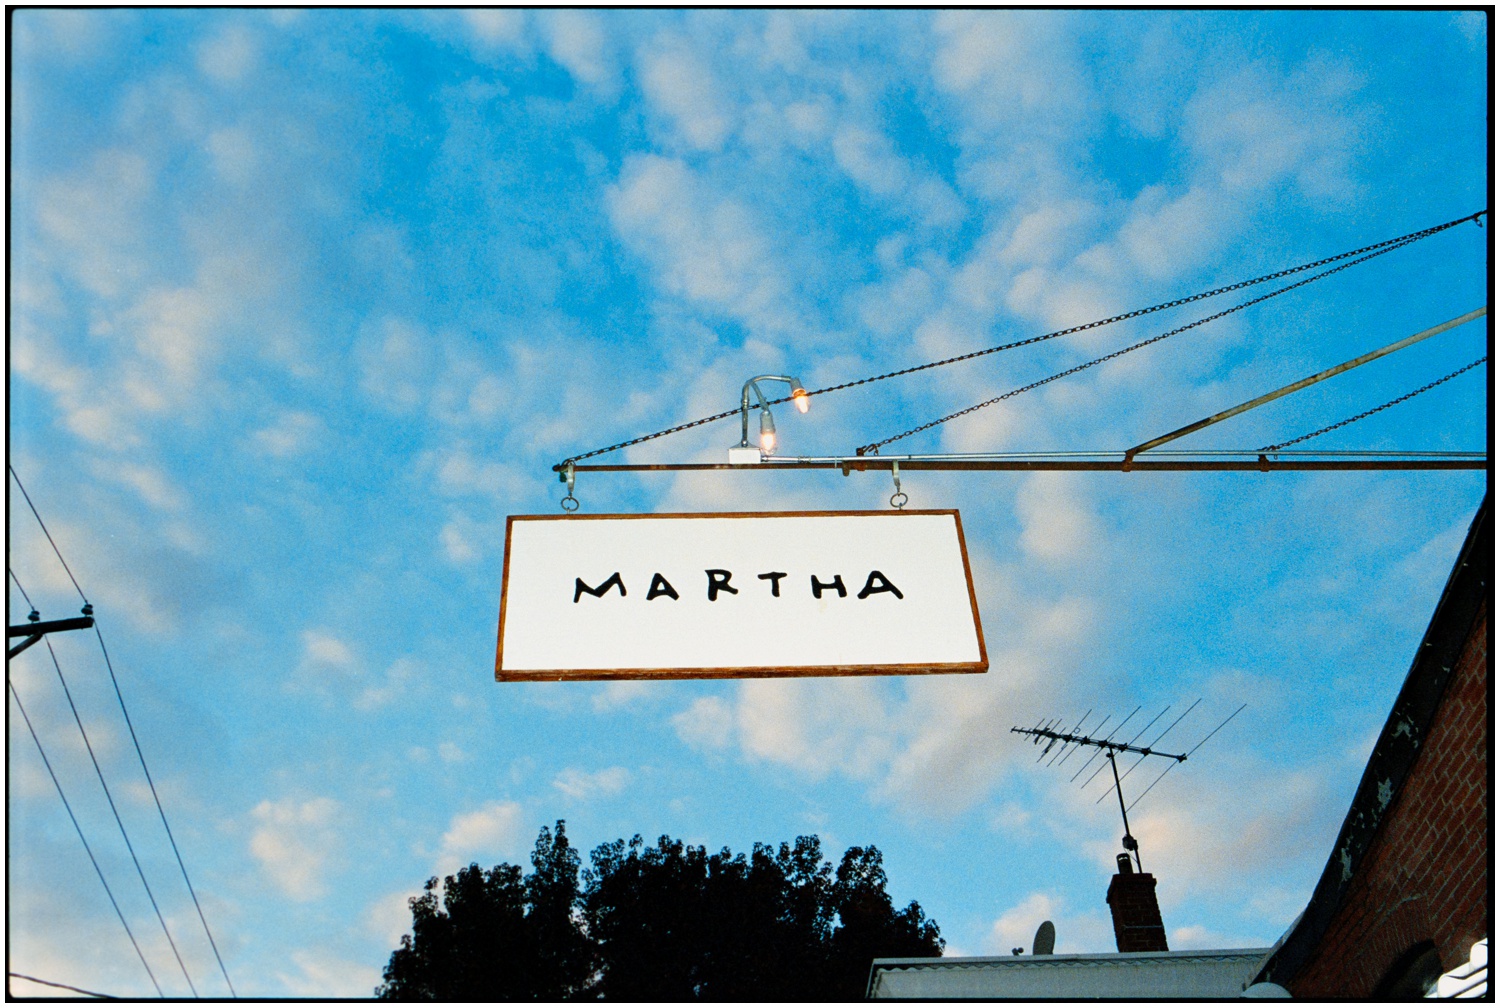 A sign with the text "MARTHA" hangs against a sky with scattered clouds, mounted on a metal arm extending from a brick building in Philadelphia.